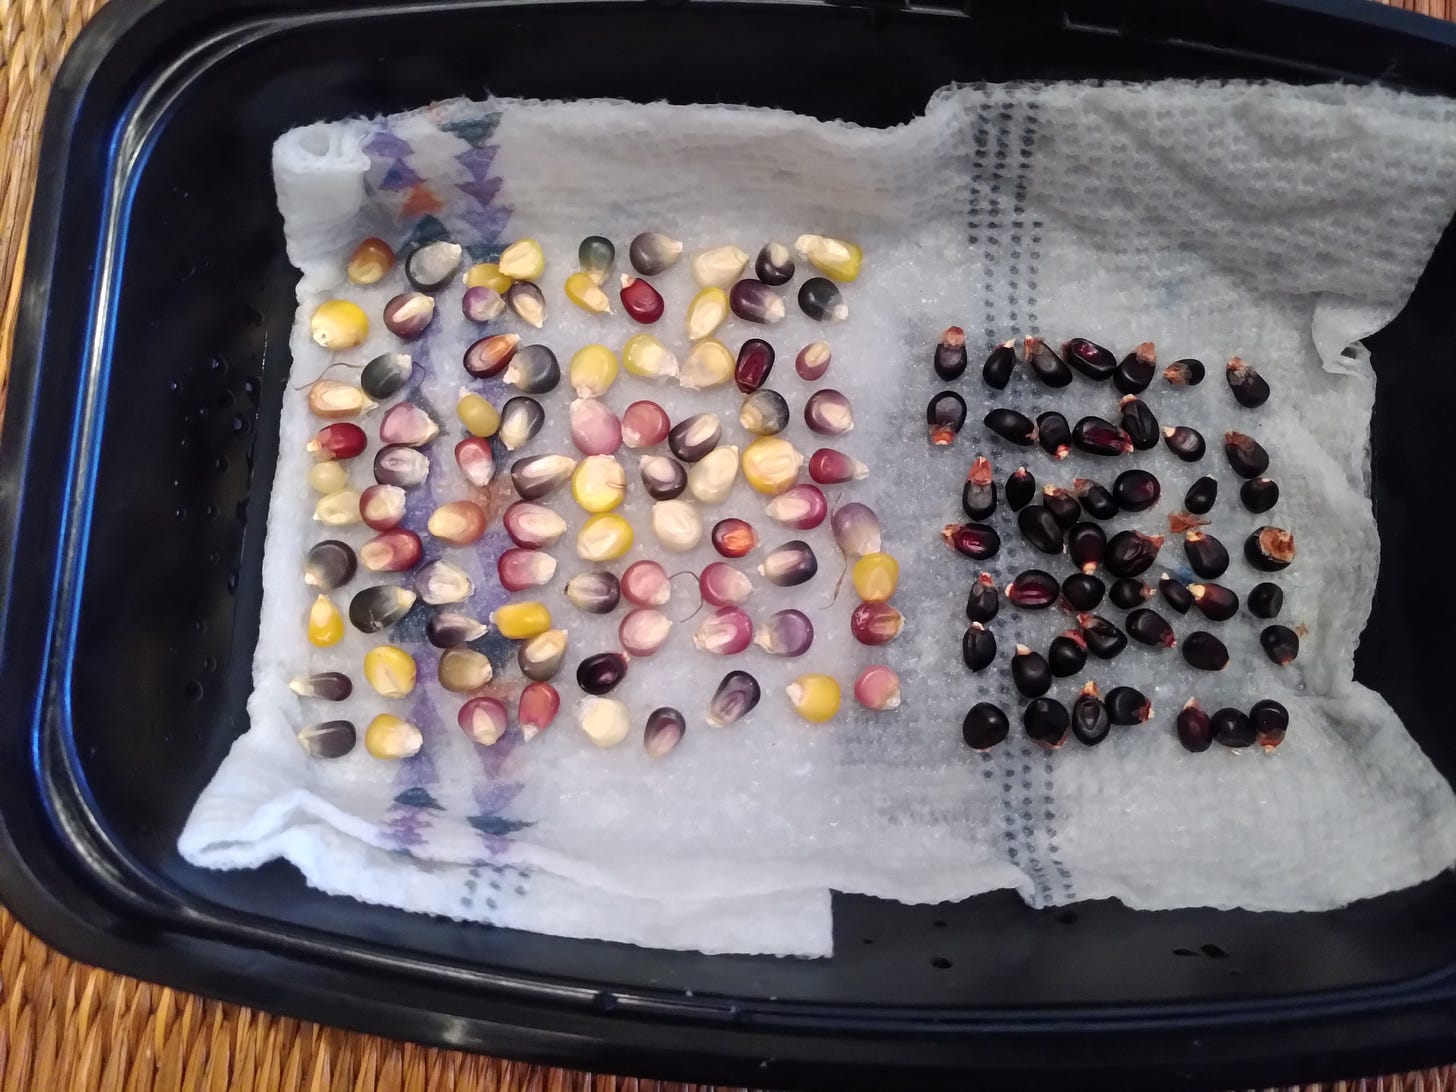 Glass Gem and Dakota Black Corn Kernels on wet papertowel in a takeaway container.